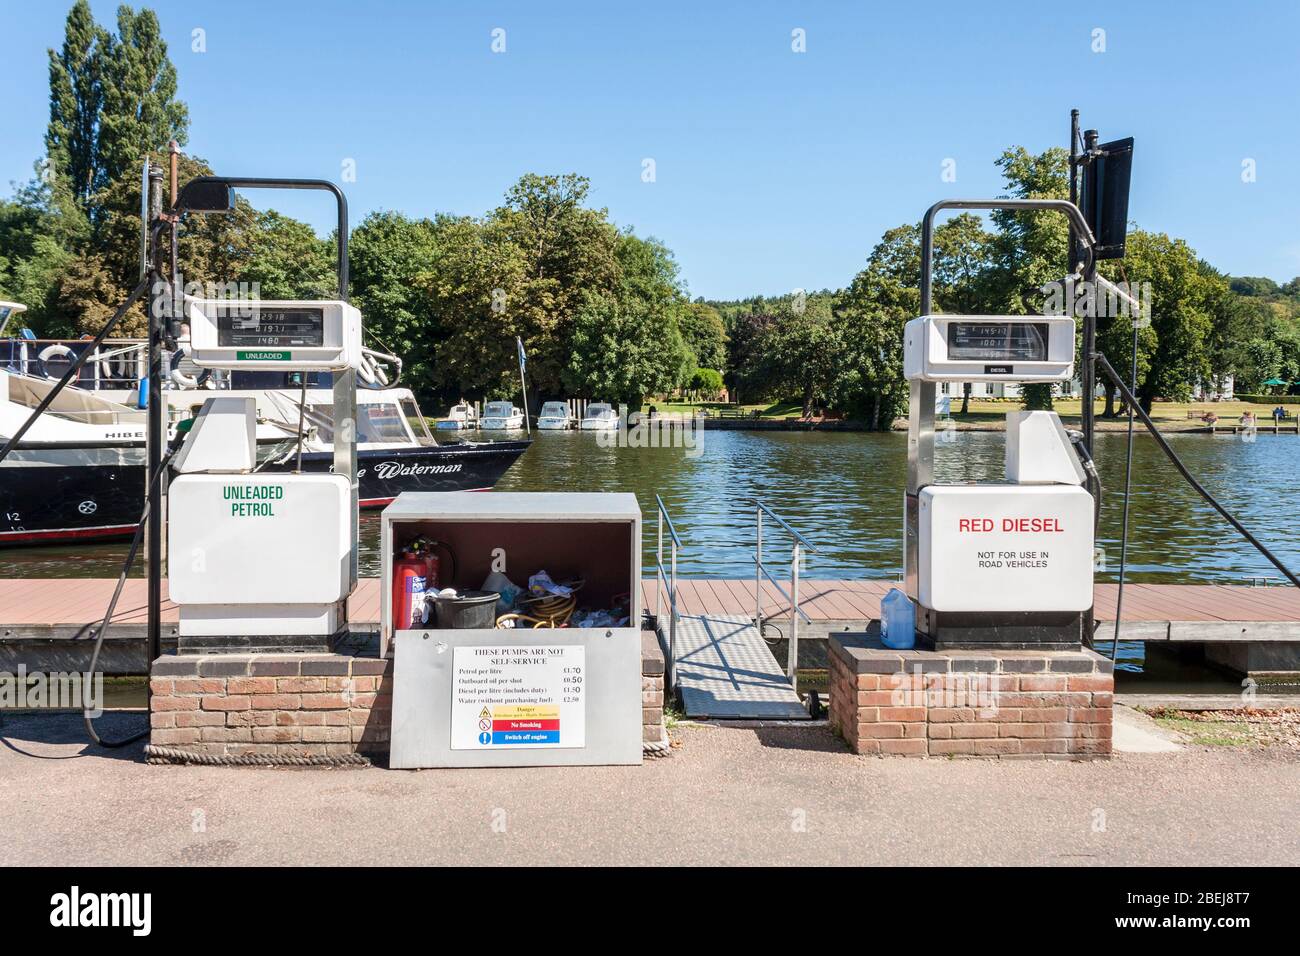 Fuel pumps for river craft on Thanms river side. Stock Photo